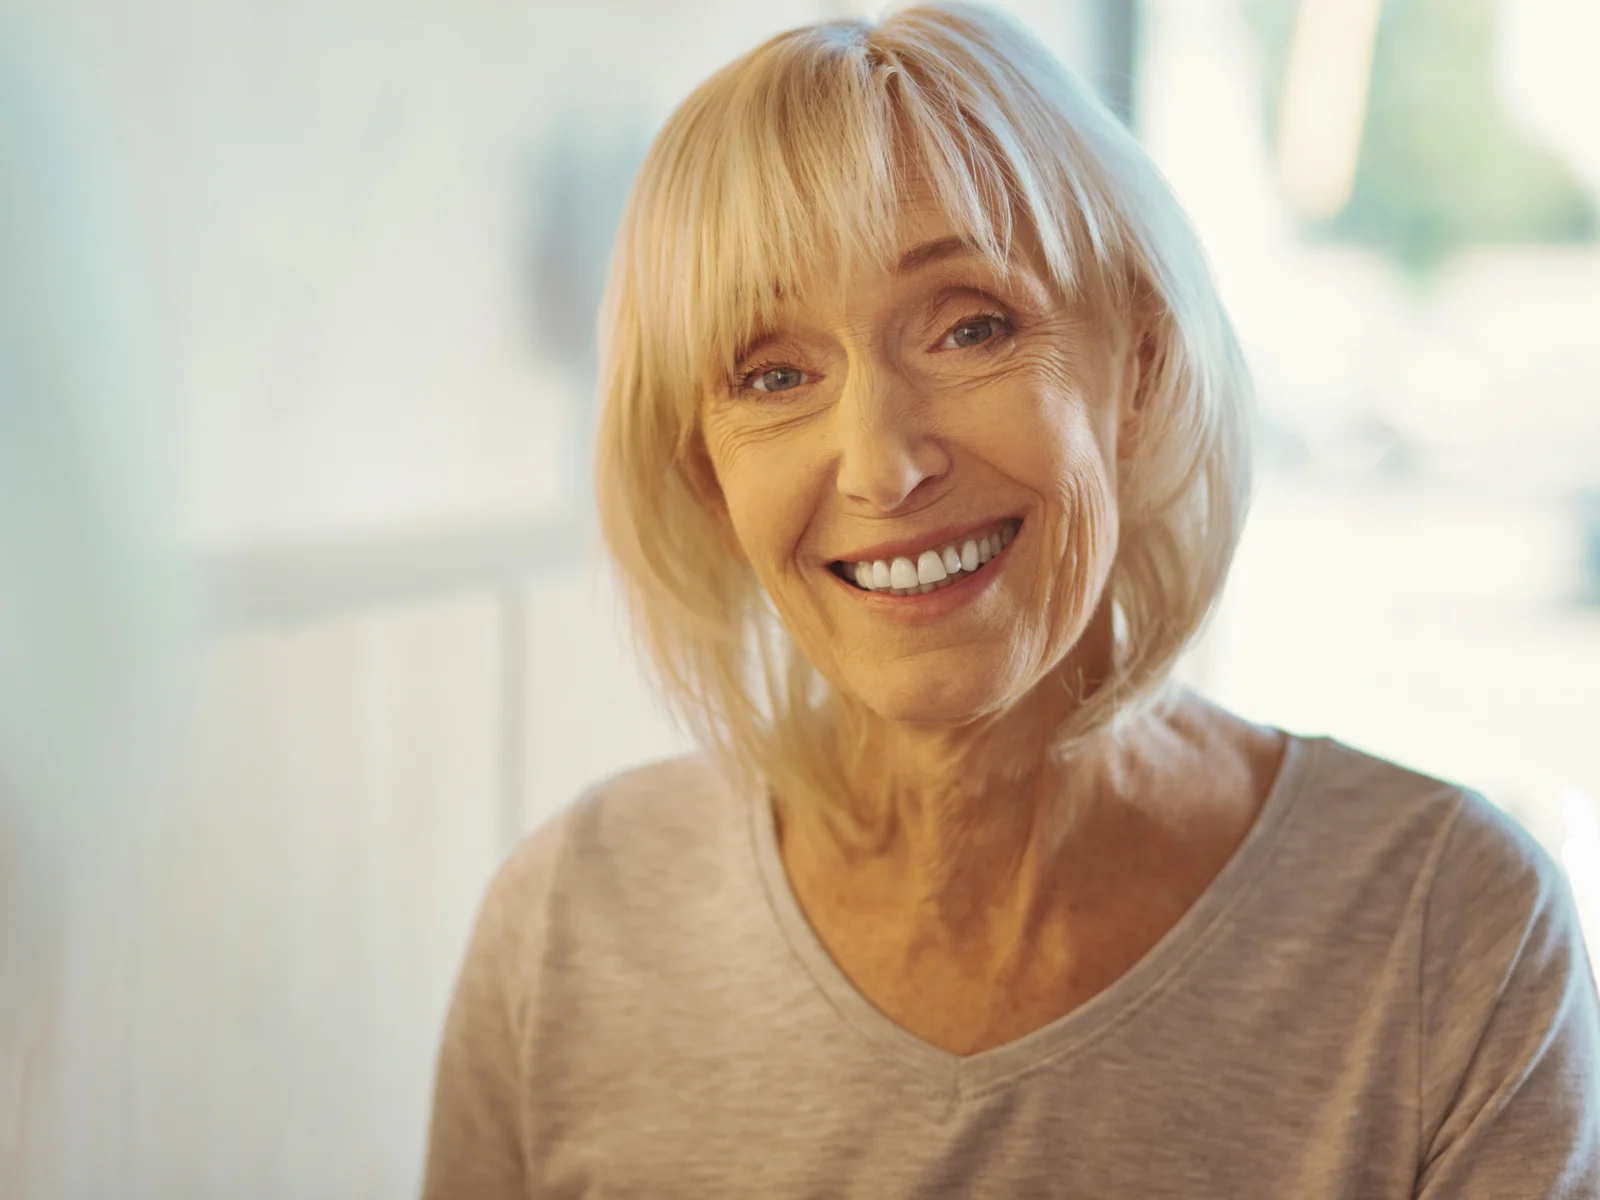 Razored Bob With Bangs and Face-Framing Layers, a great hairstyle for women over 70